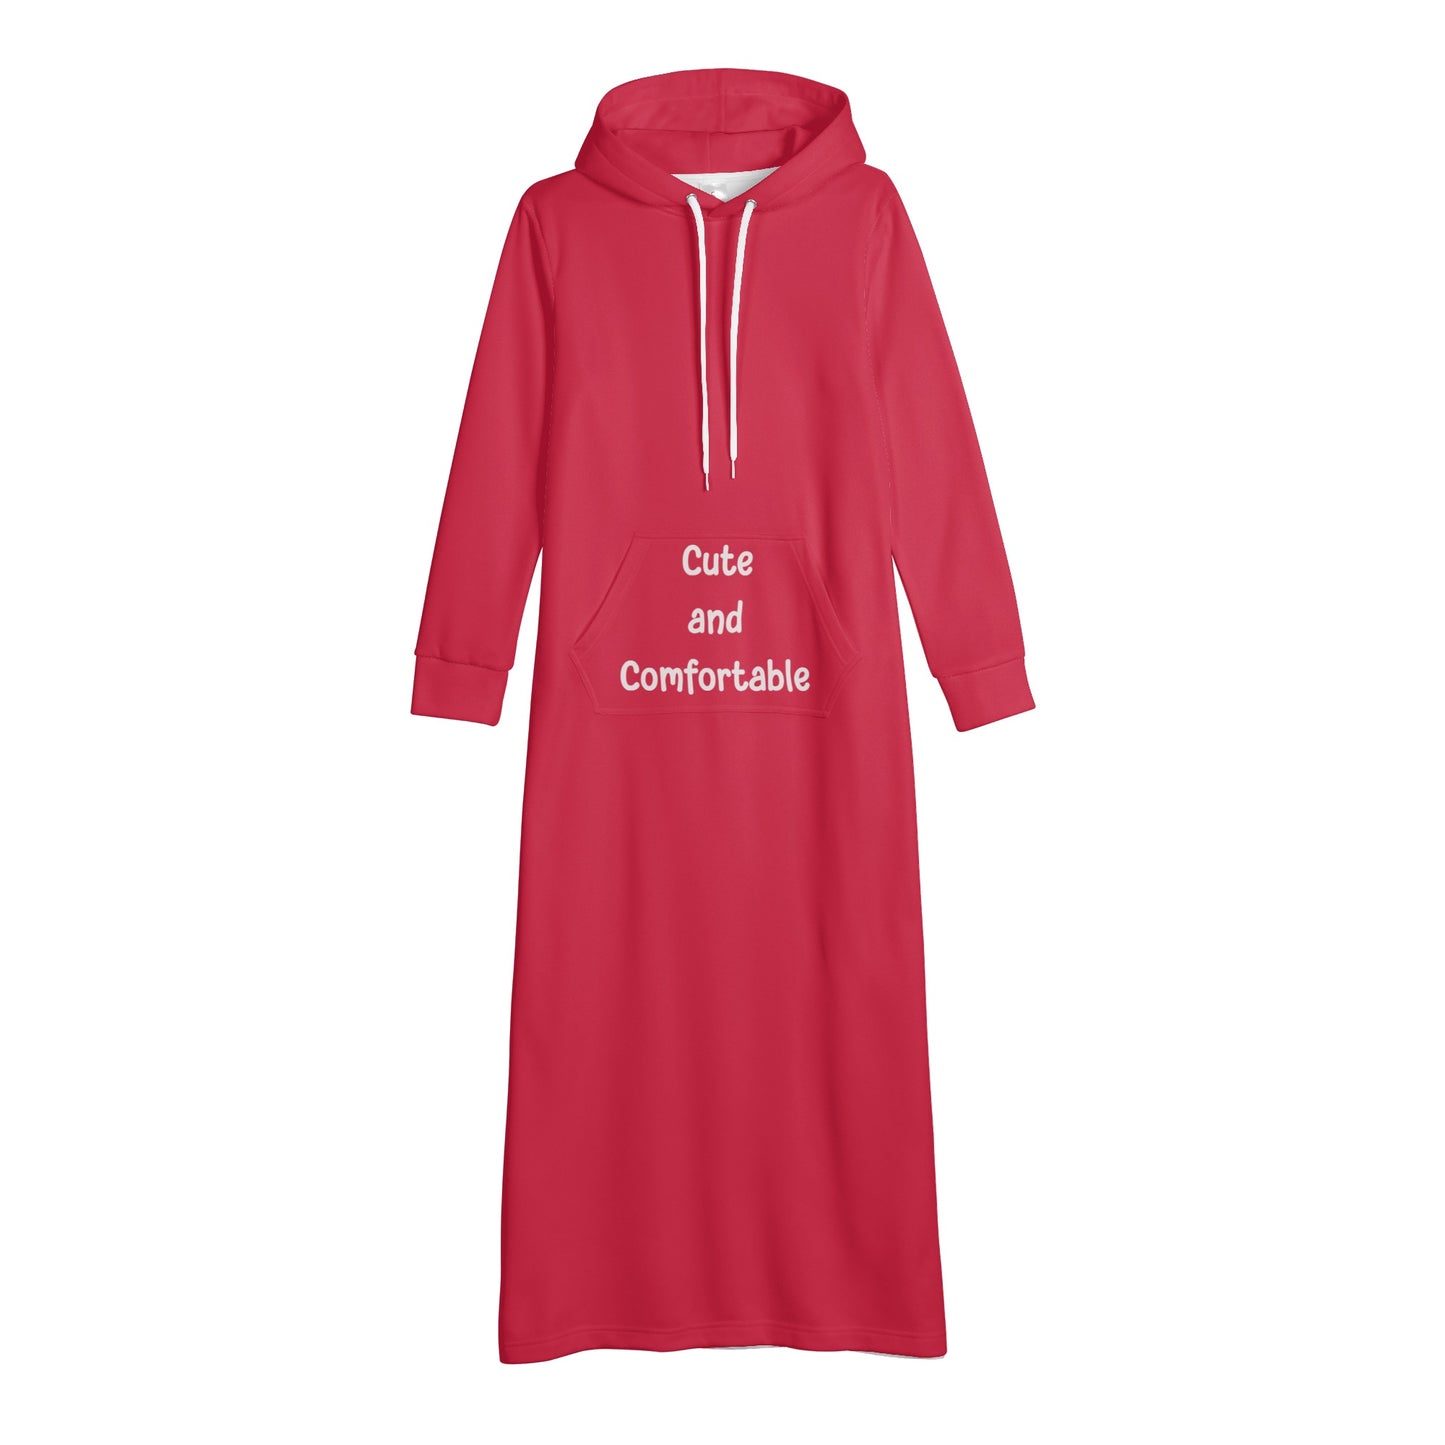 T4x Red Womens Cute and Comfortable Long Length Hoodie Dress